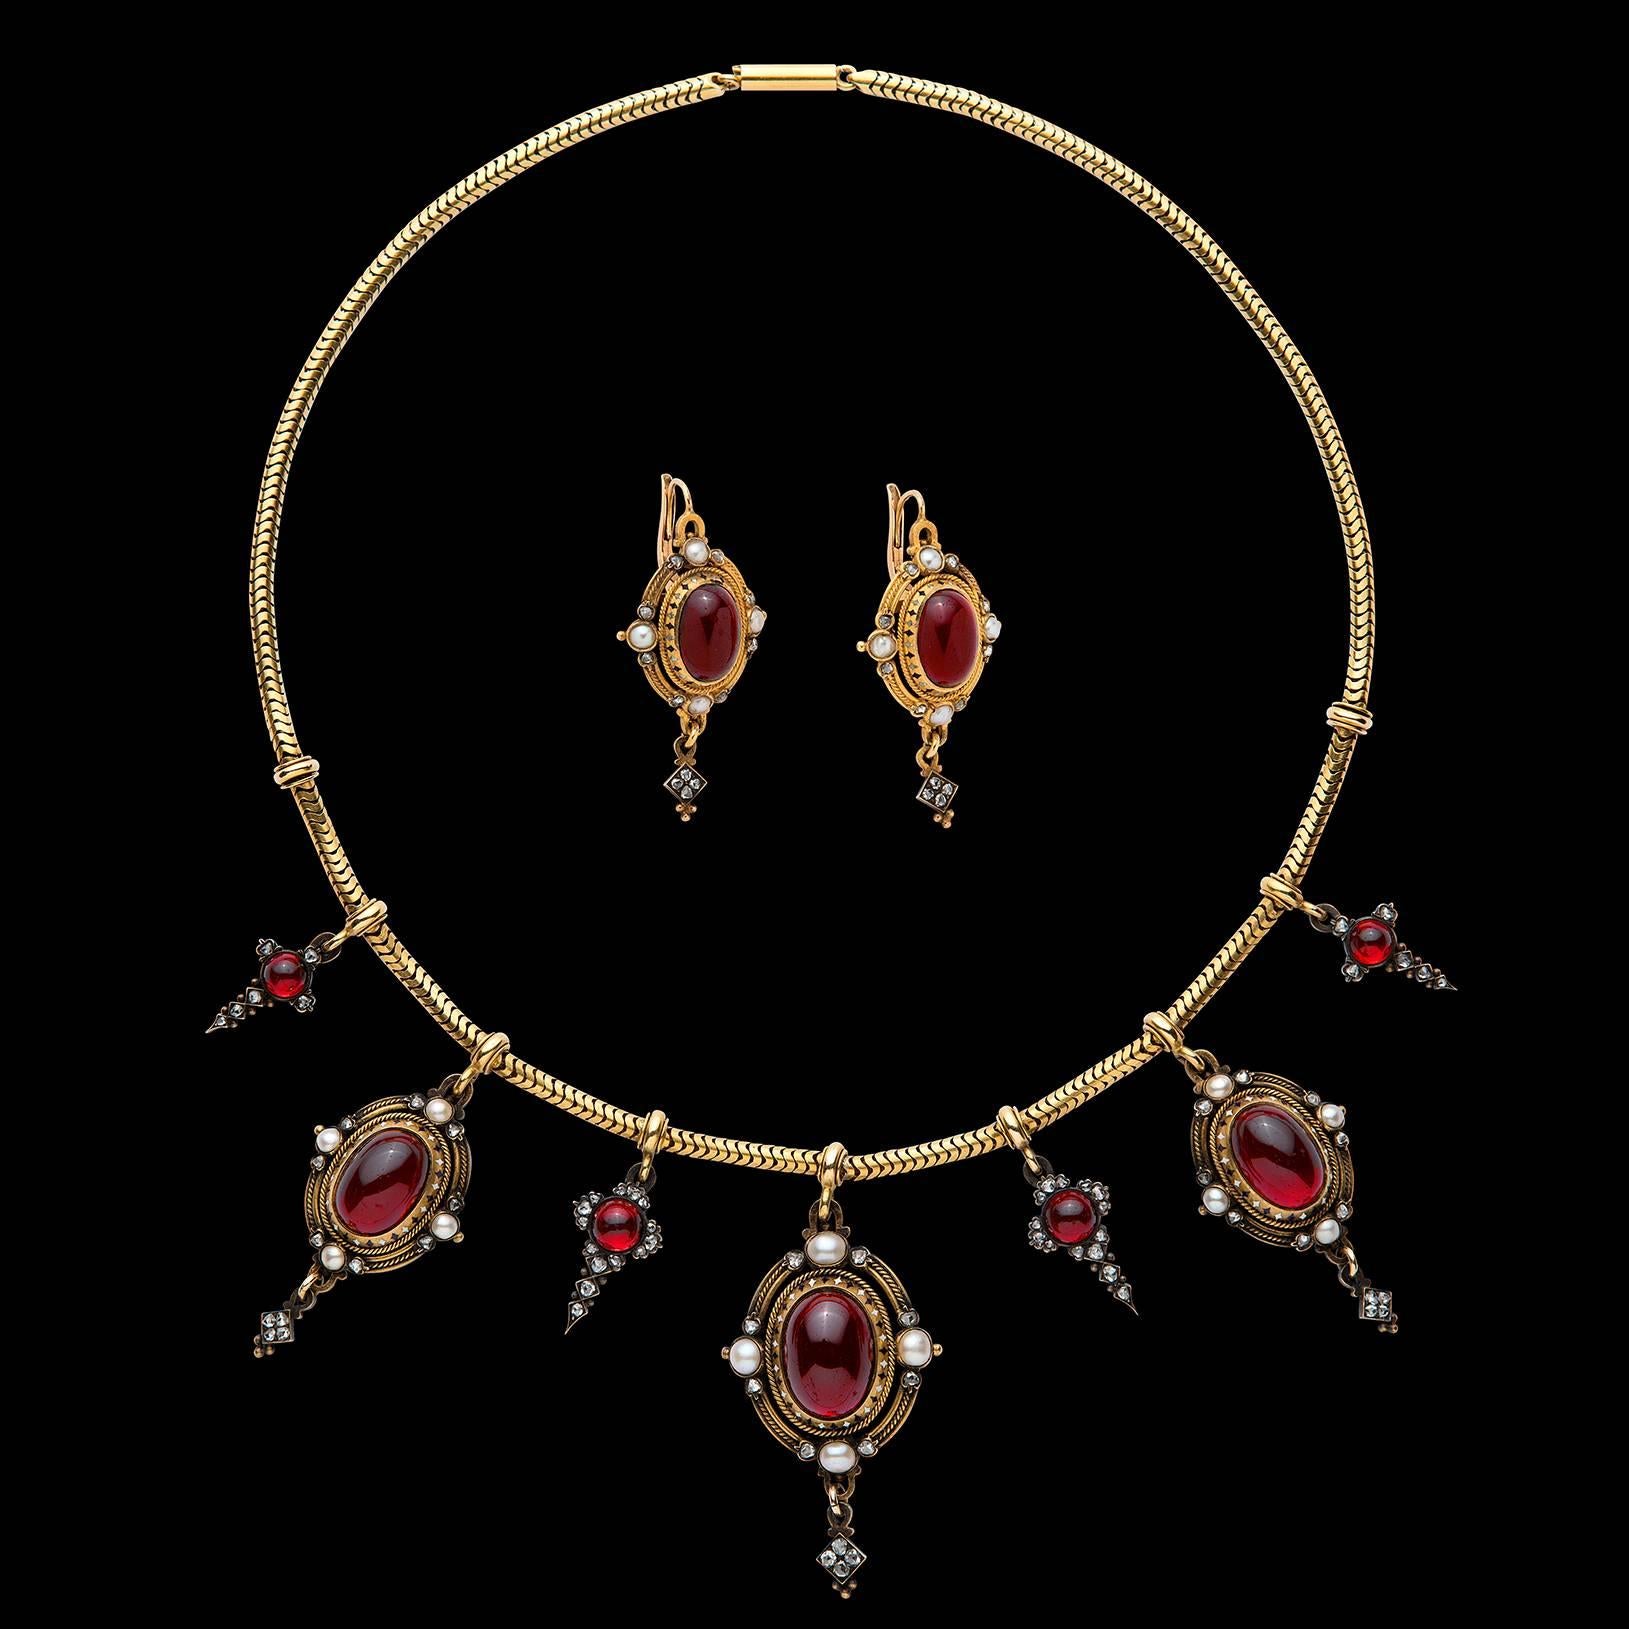 A prime example of Holbeinesque Jewelry, this incredible piece of history features matching necklace and earrings highlighting over 32 carats of phenomenal cabochon garnets set amidst 100 Rose Cut Diamonds and accent pearls. The total weight of this